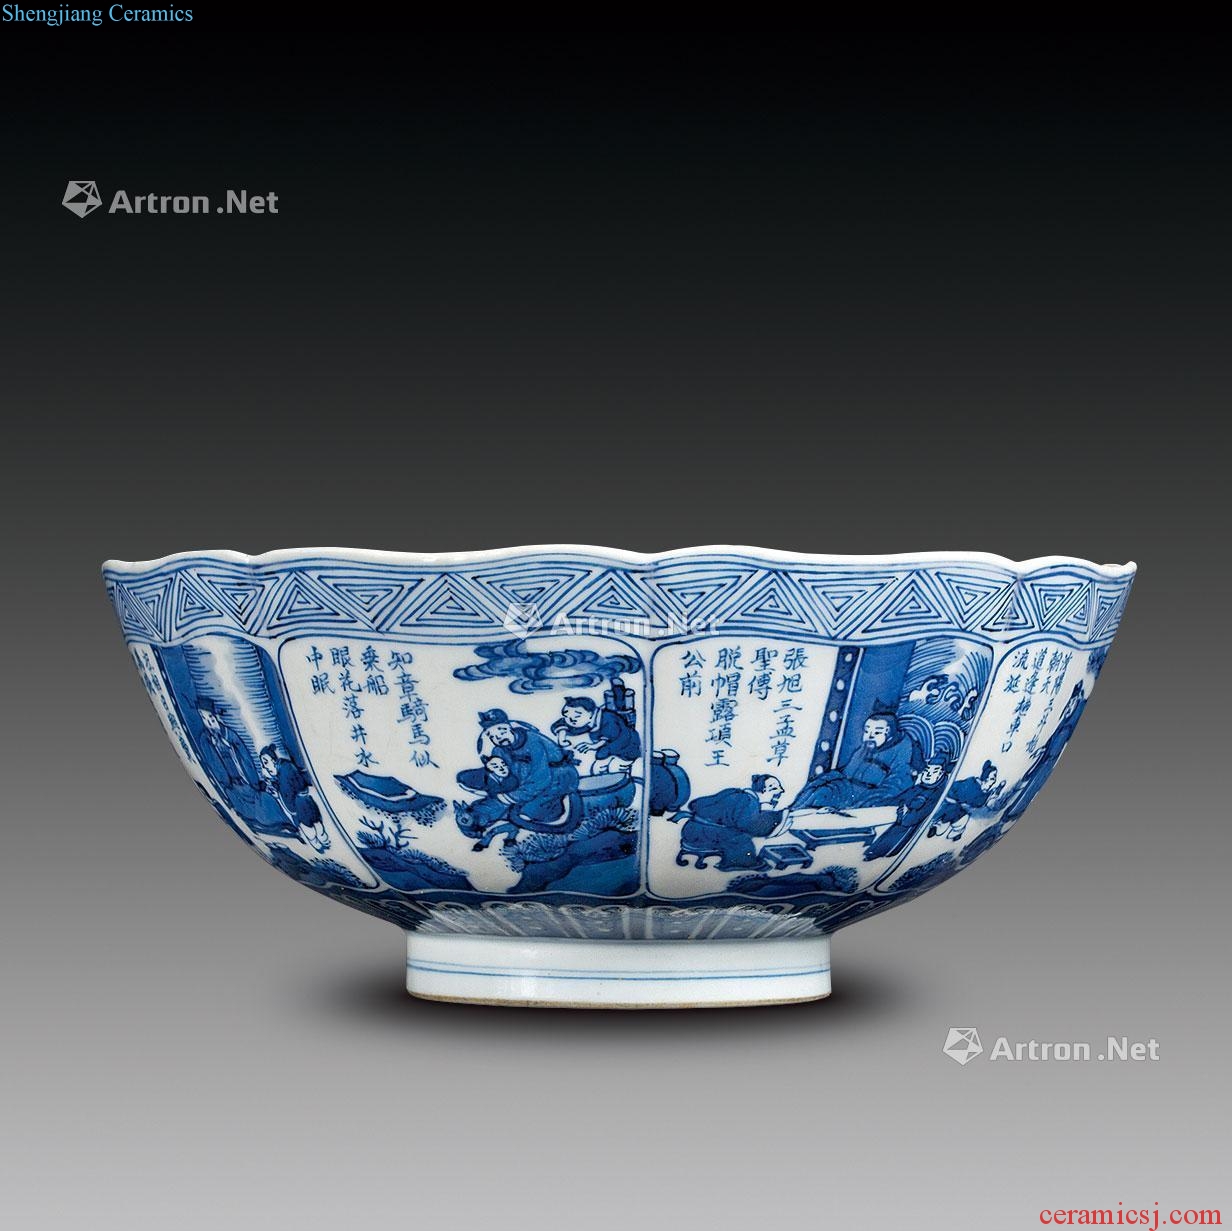 The Qing period A FINE AND RARE STORIED BLUE AND WHITE MOLDED "LOTUS" RIM